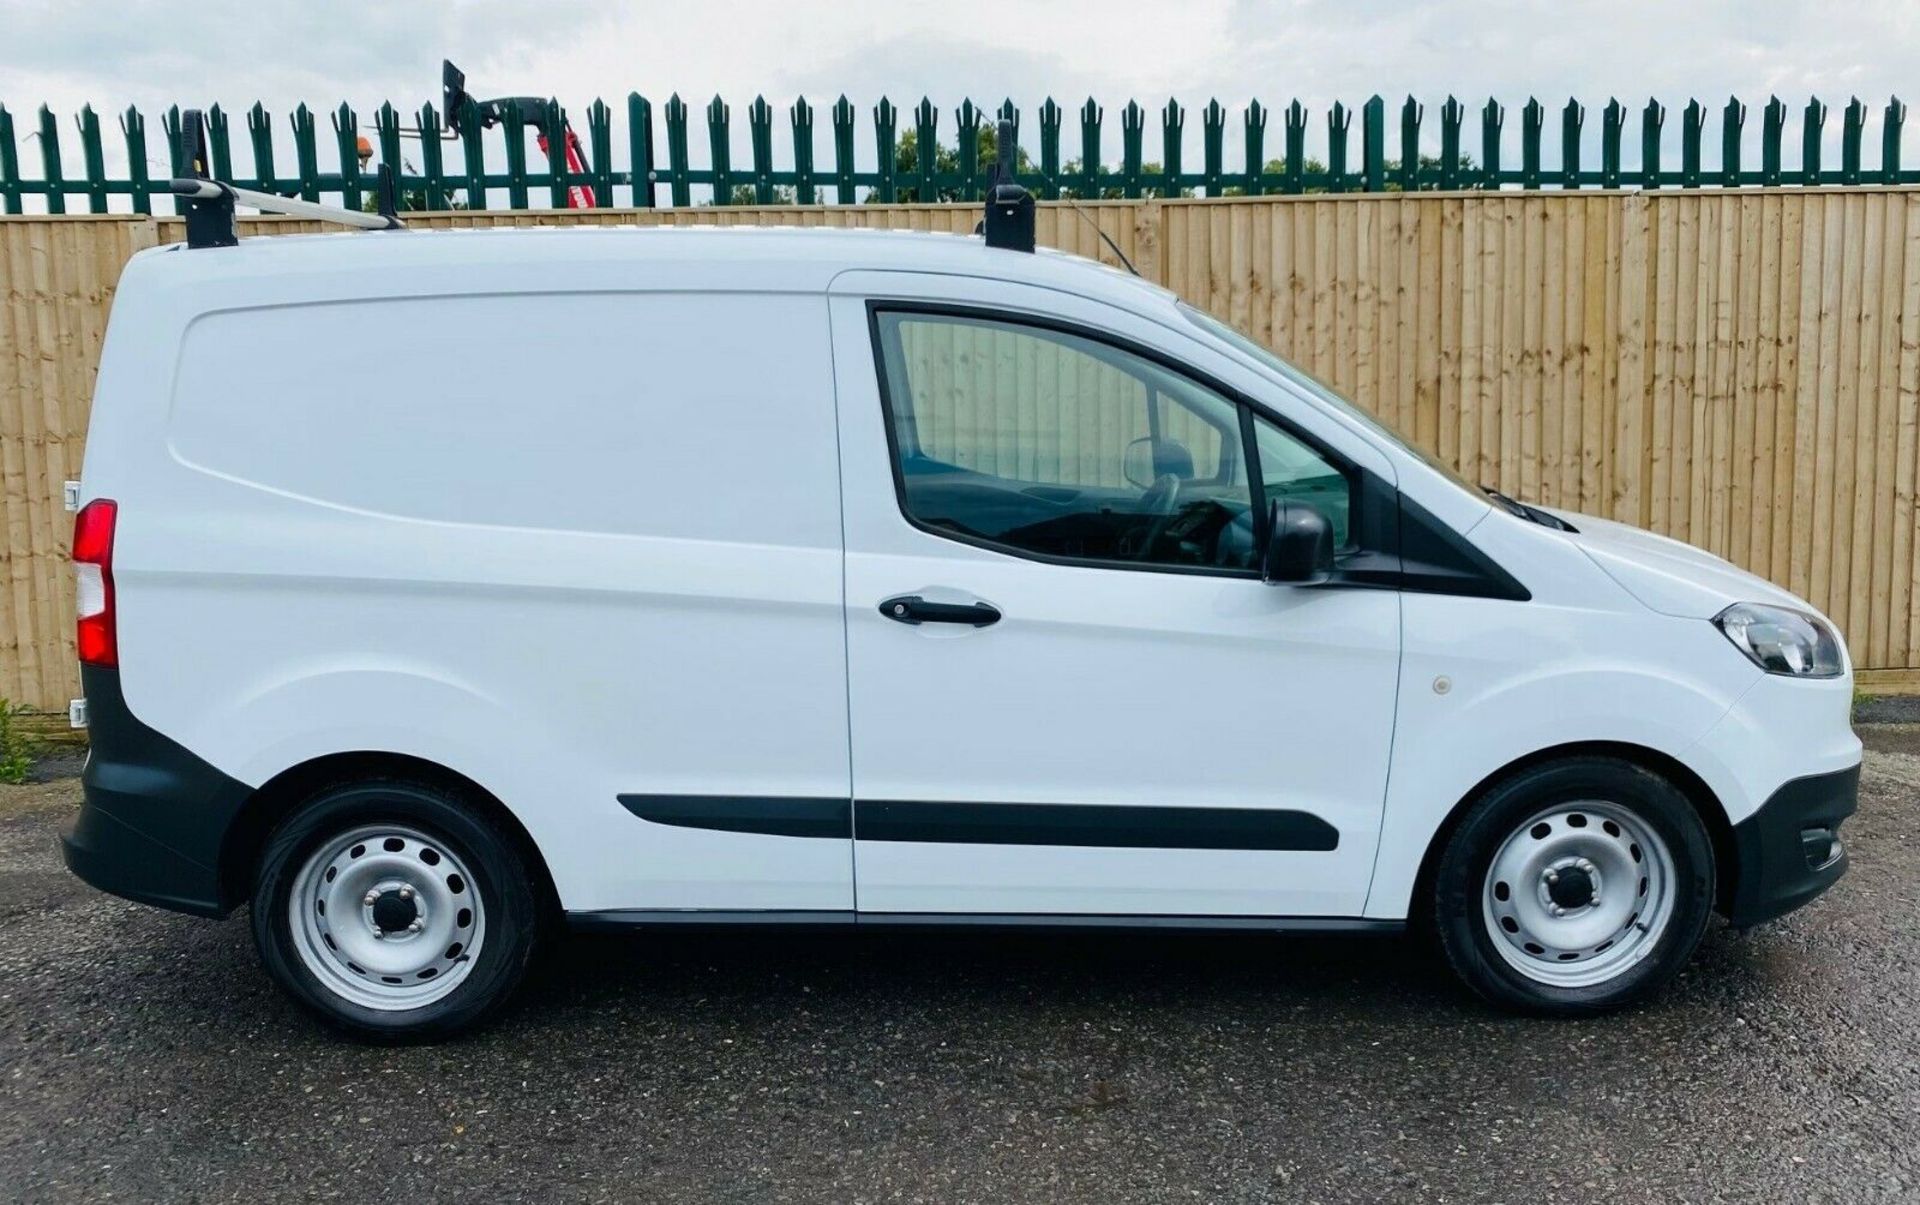 Ford Transit Courier 1.5 TDCI - Image 3 of 12